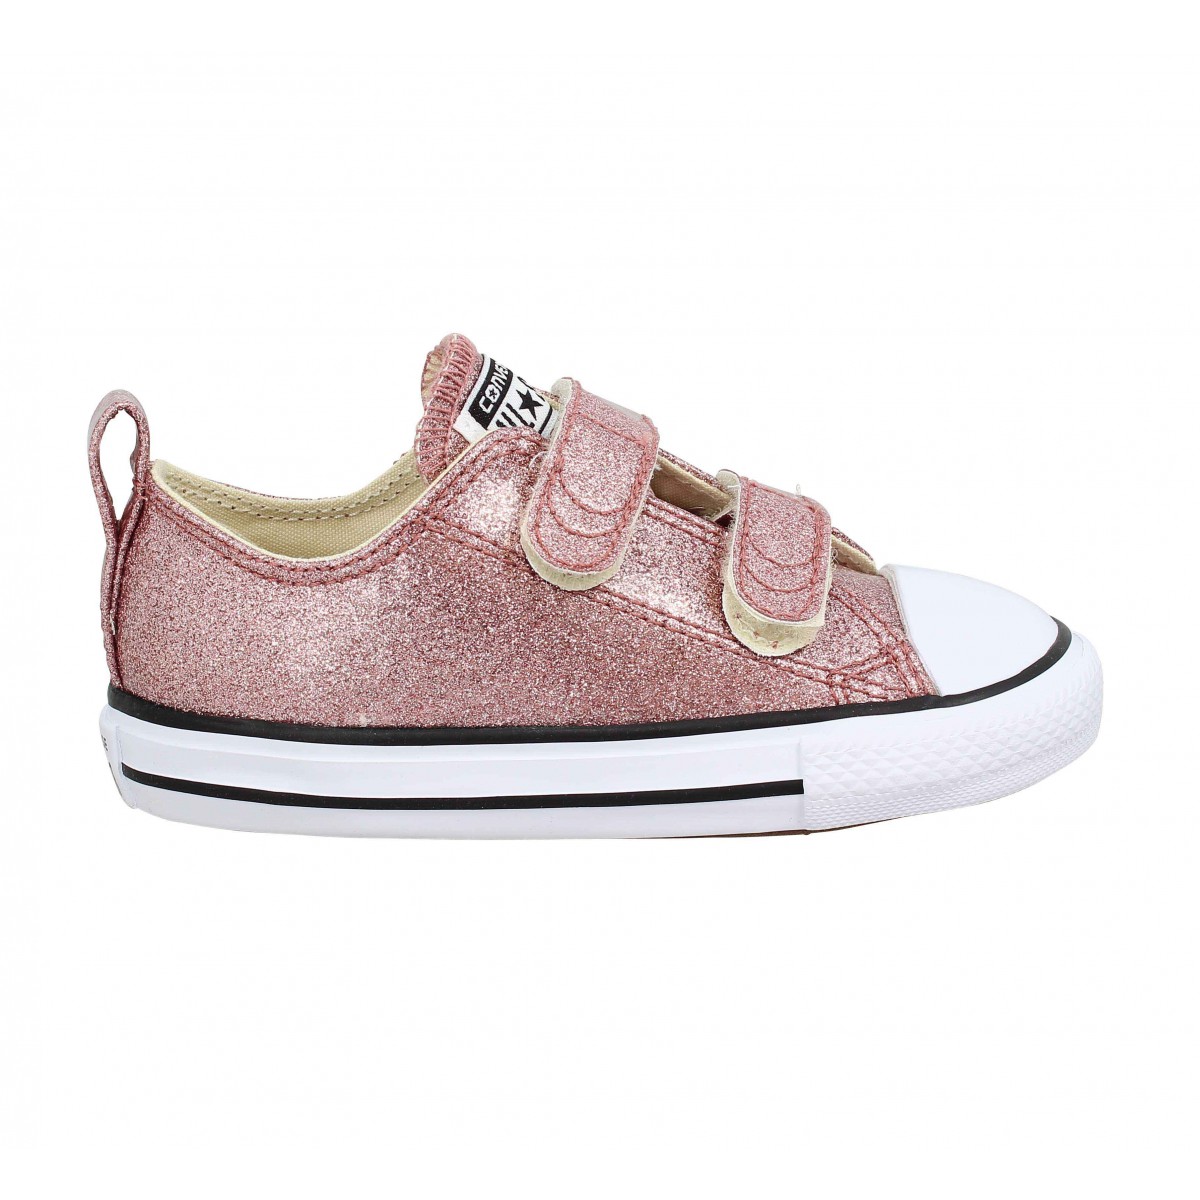 Chaussures Converse chuck taylor all star 2v paillettes enfant ...